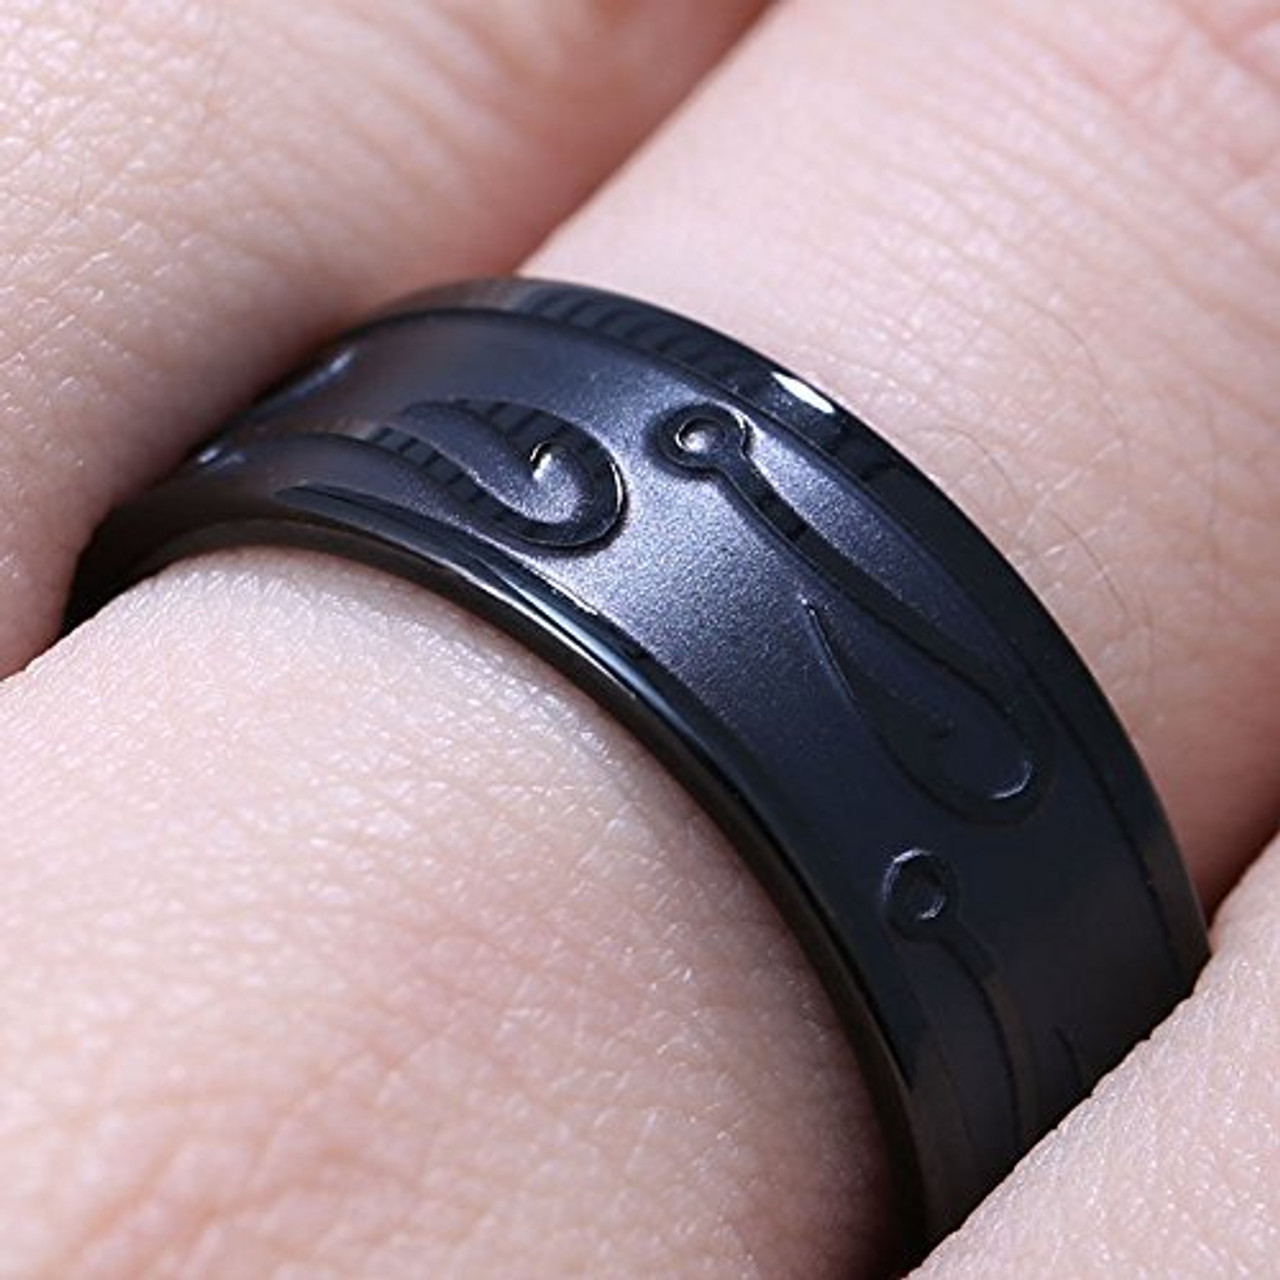 8mm) Unisex or Men's Fishing Ring / Fisherman's Wedding ring band. Gold  Tone Titanium Band with Embossed Fish Hooks. Wedding ring band Comfort Fit  Ring - Ring Blingers